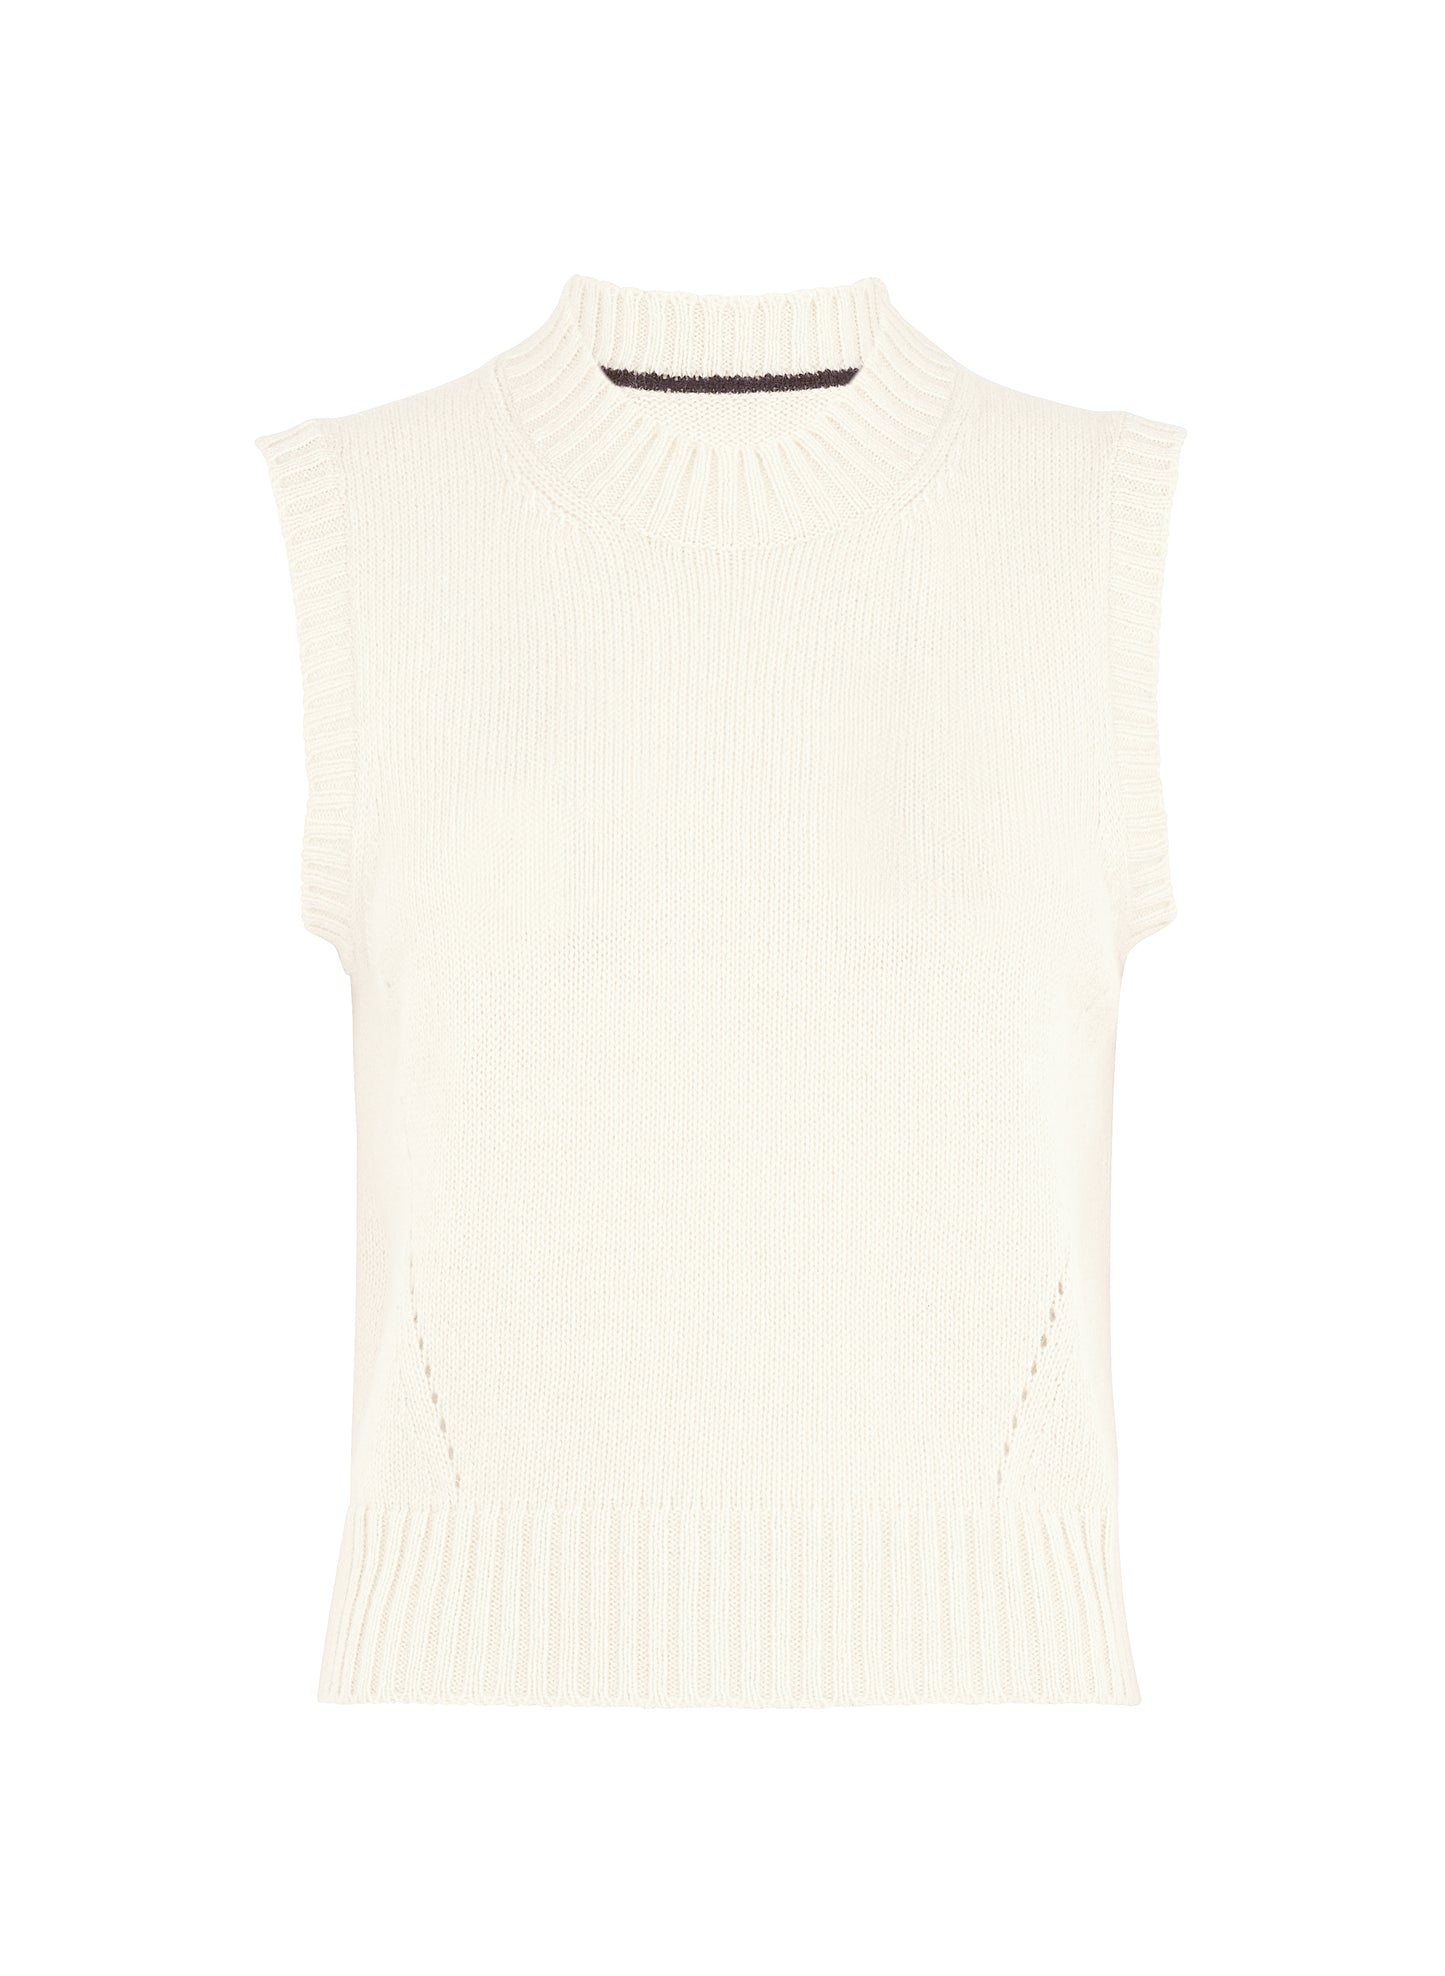 Pre-Loved Portia Eco Cashmere Knitted Vest